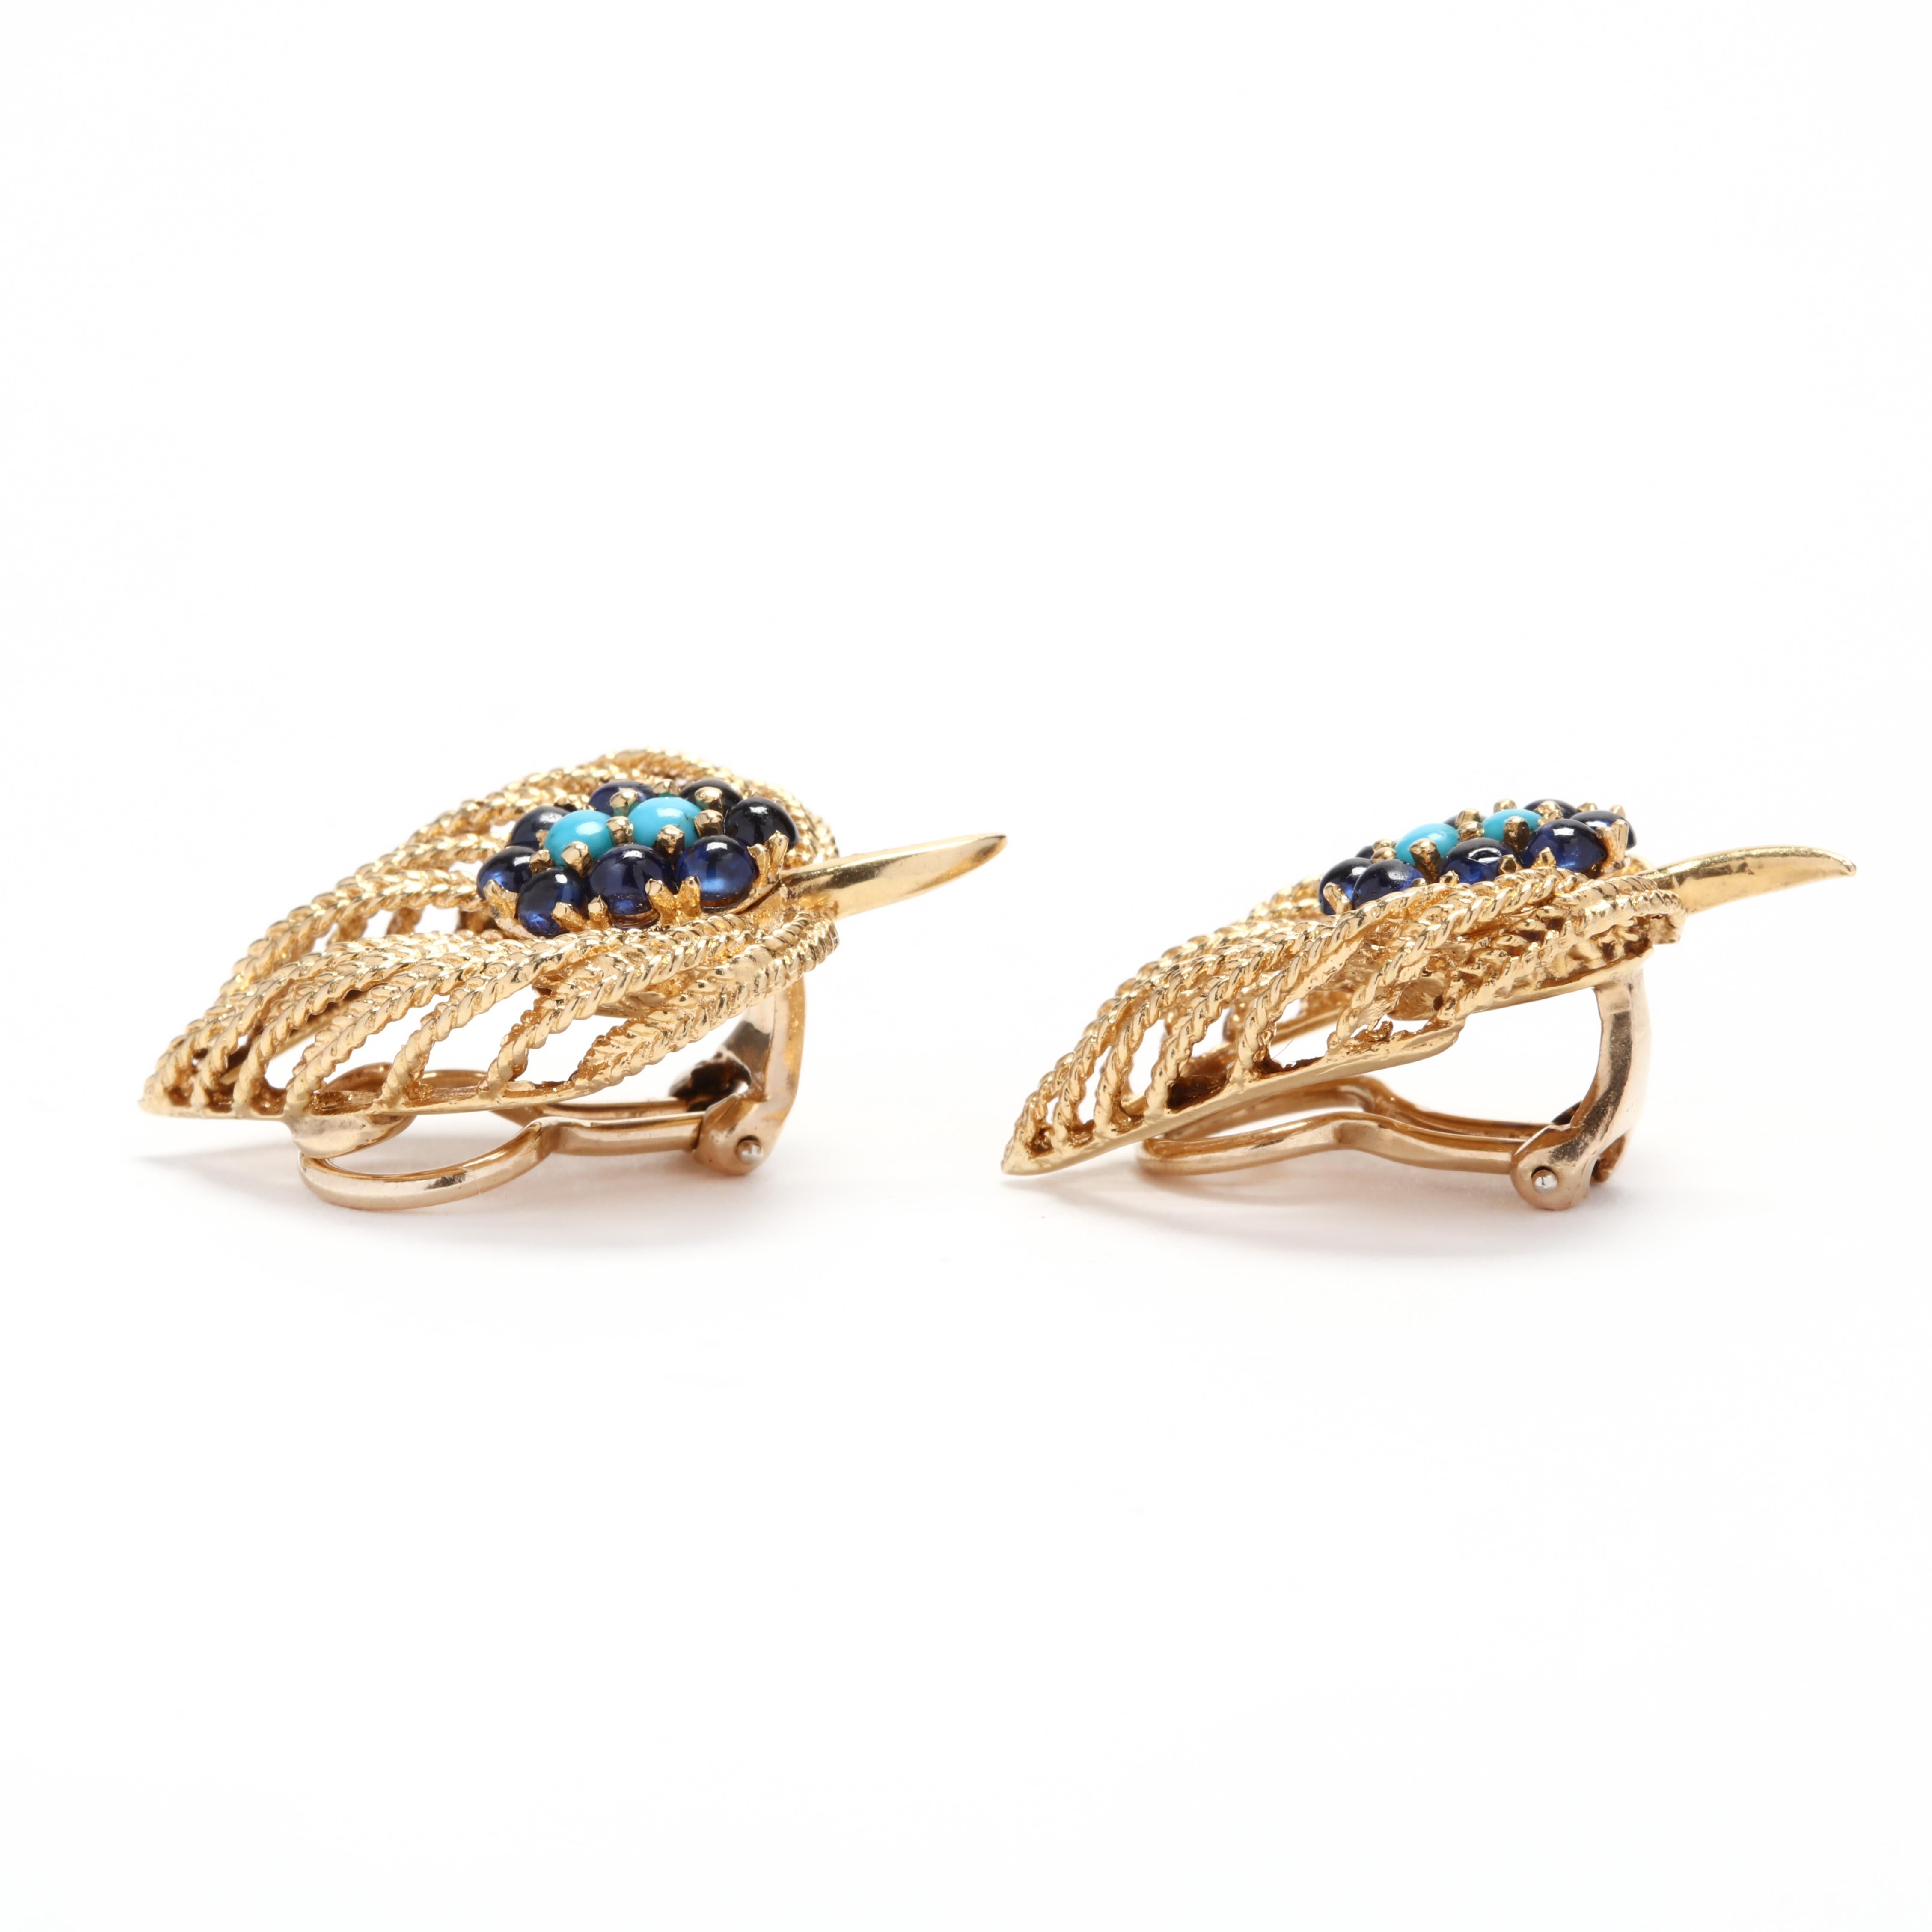 Round Cut Vintage 18 Karat Yellow Gold, Turquoise and Sapphire Leaf Earrings